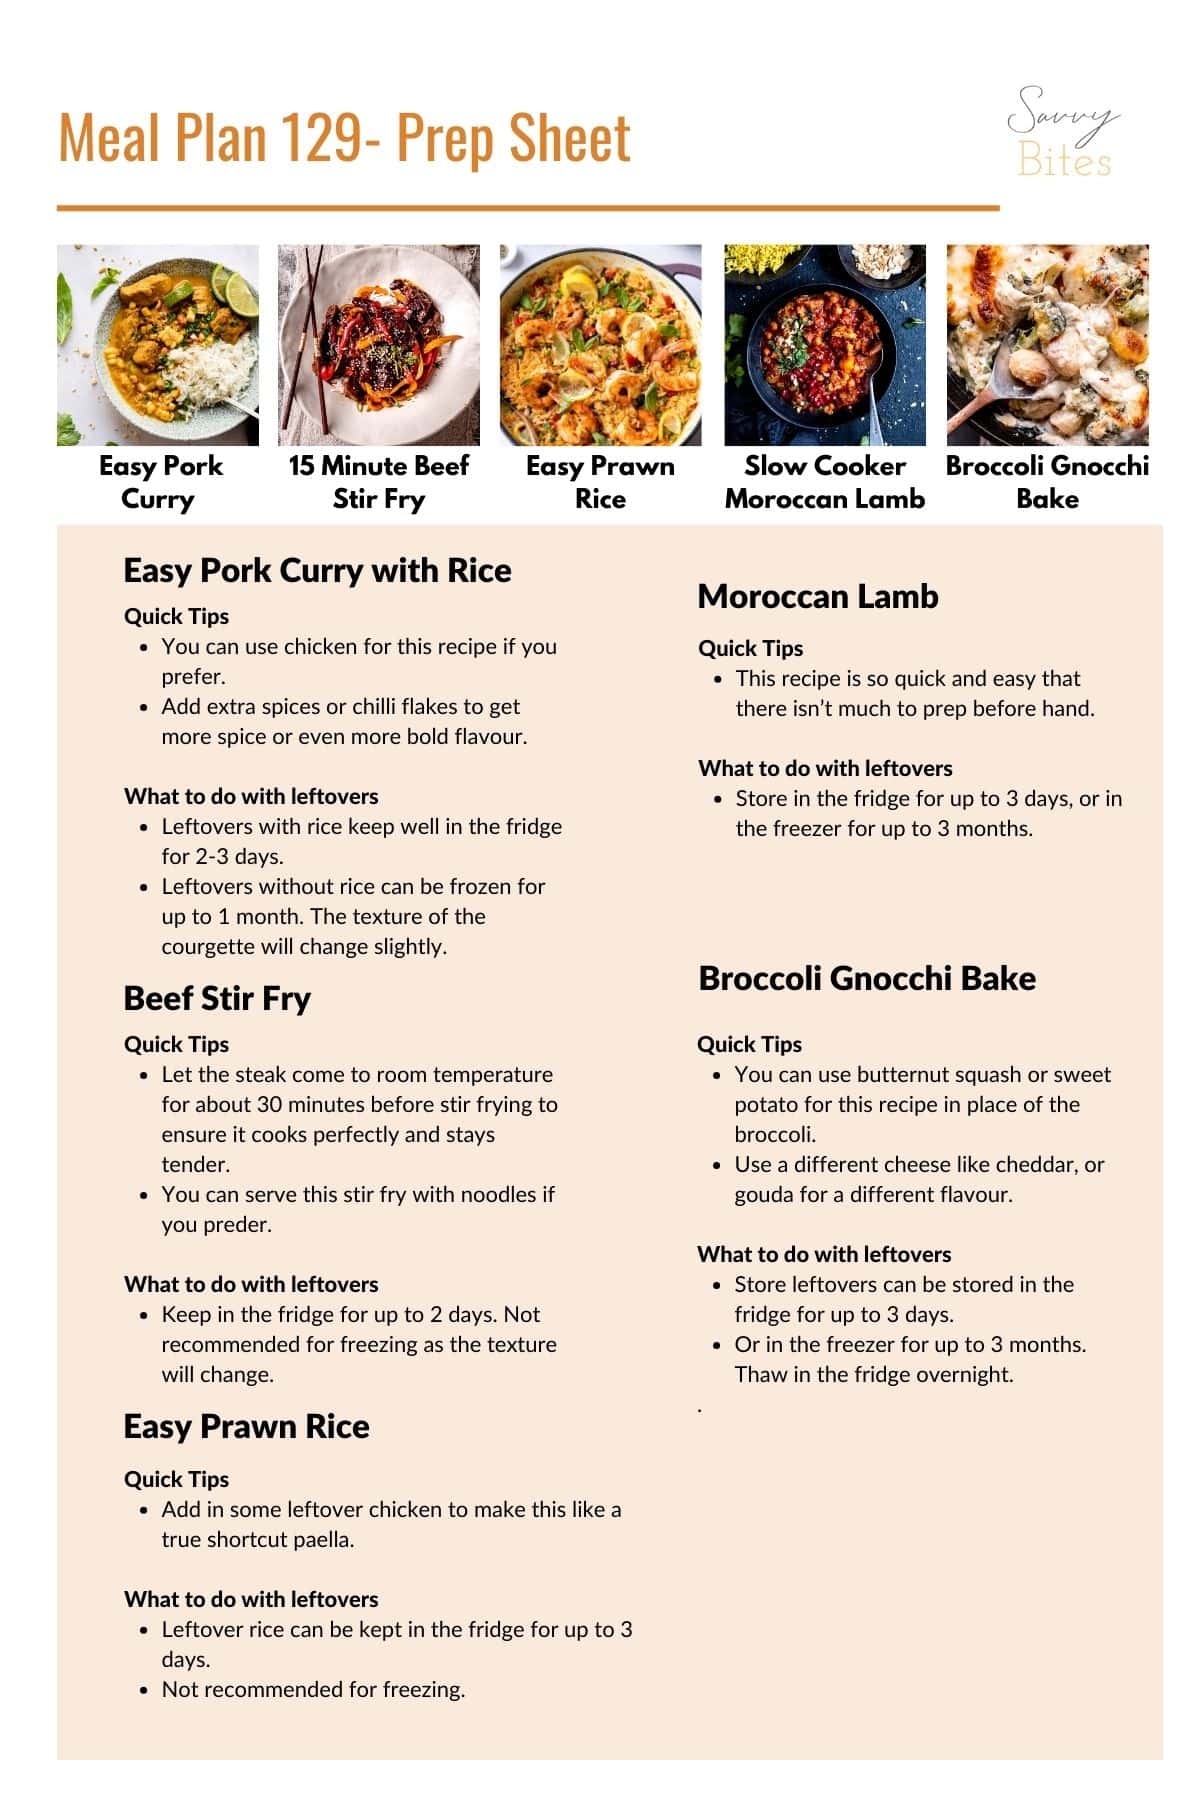 Budget family meal plan 129 quick tip sheet.